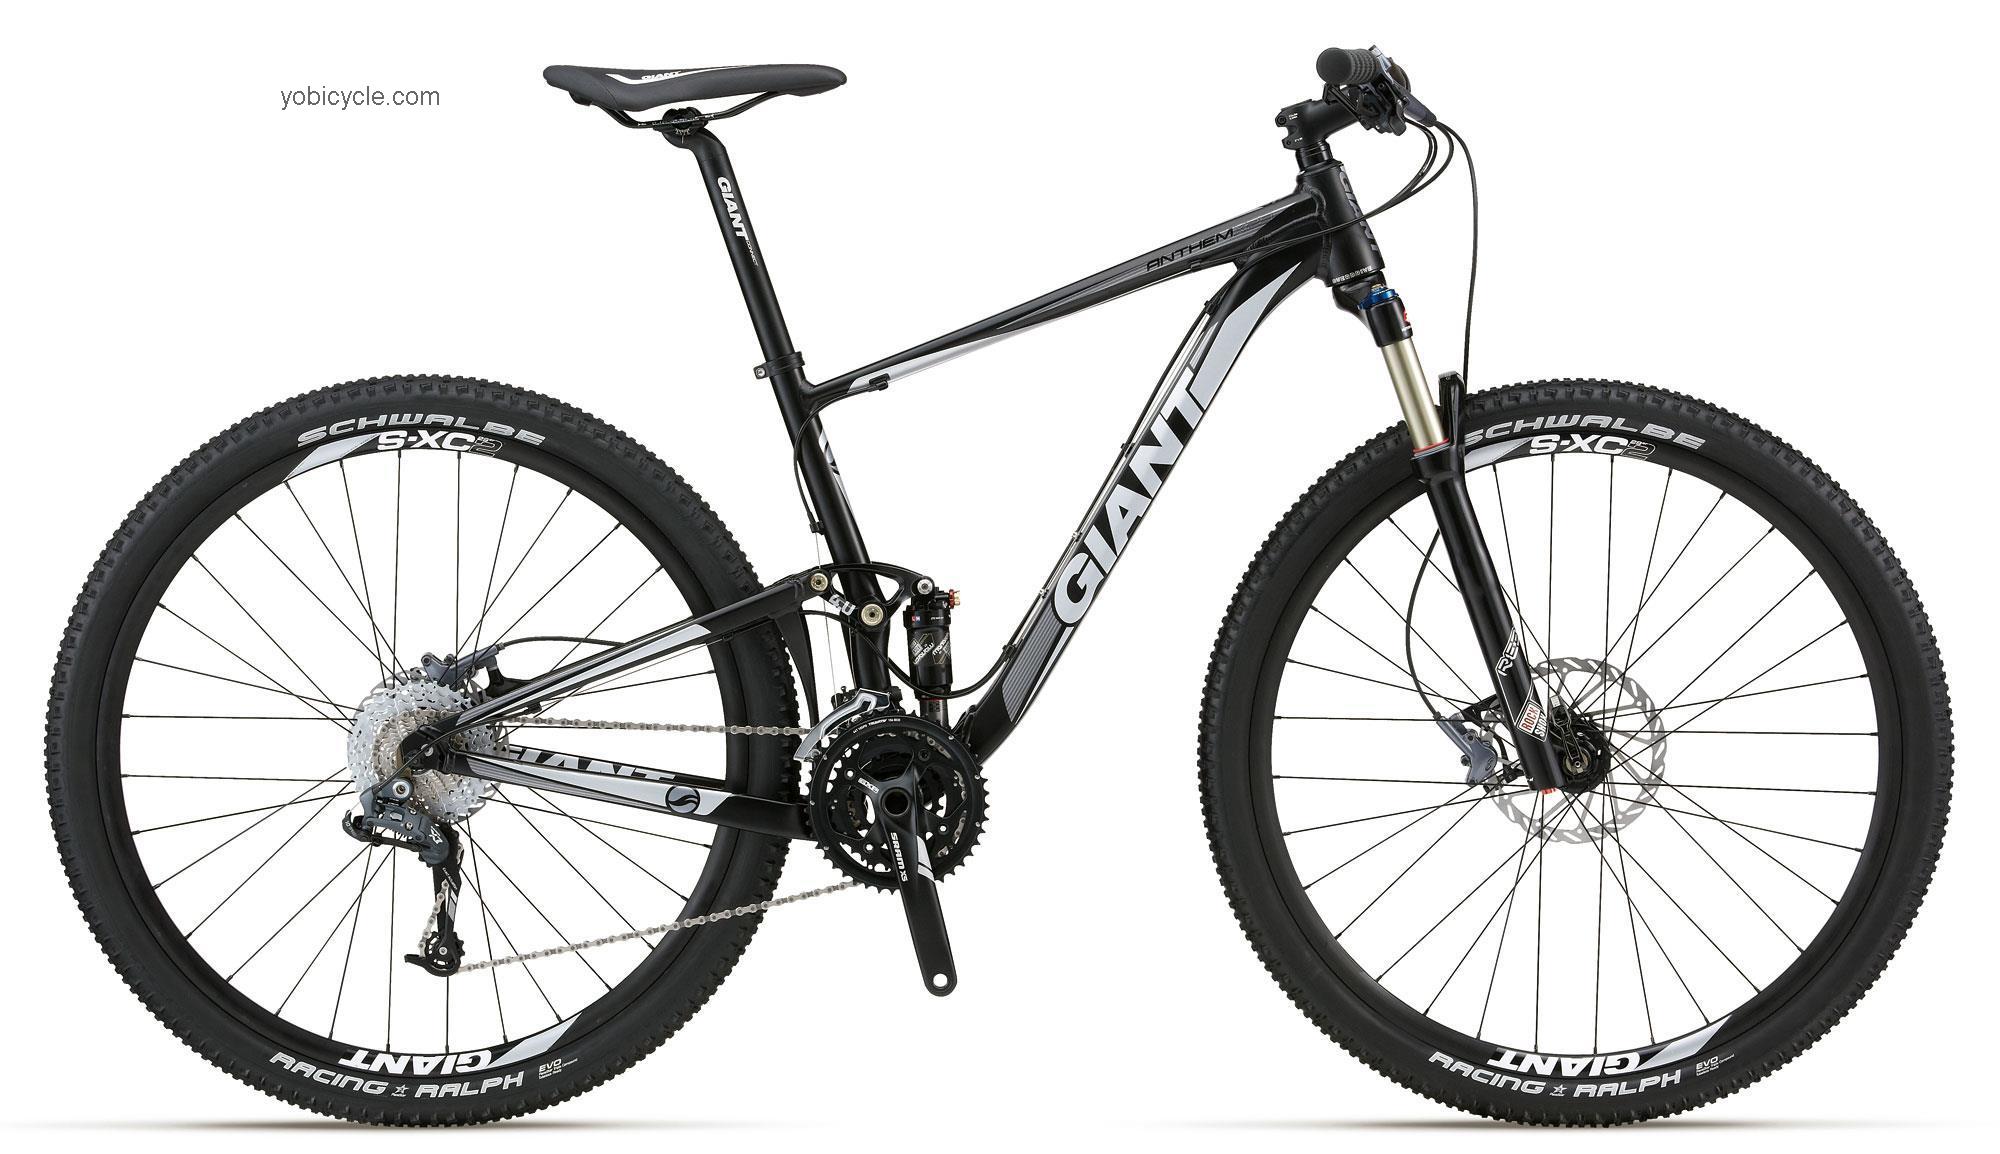 Giant Anthem X 29er 2 2012 comparison online with competitors